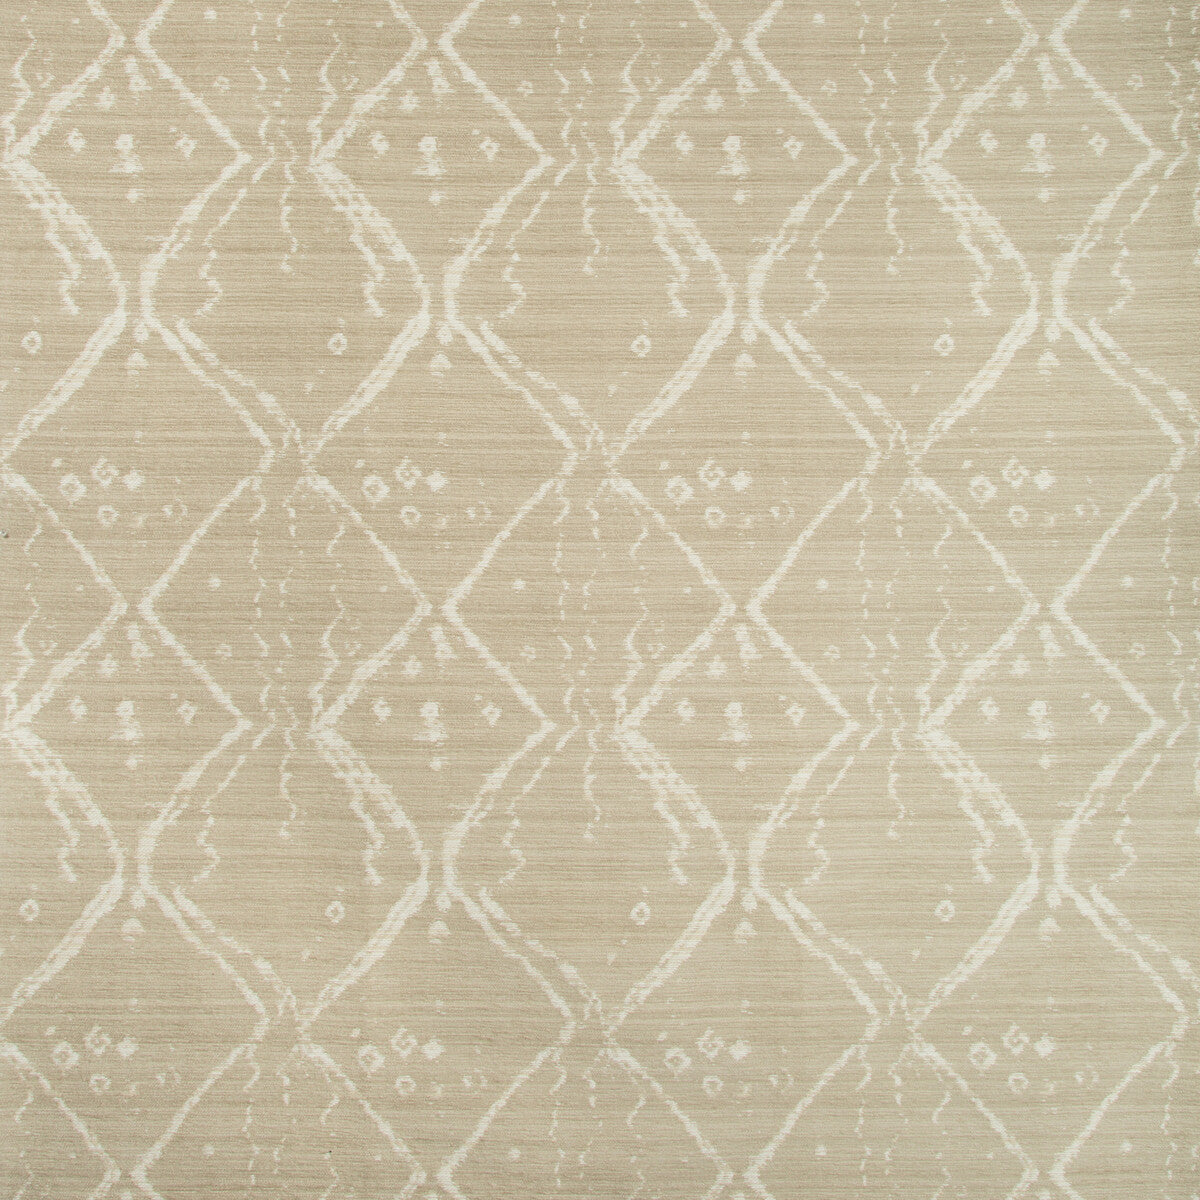 Globe Trot fabric in papyrus color - pattern 34948.116.0 - by Kravet Design in the Nate Berkus Well-Traveled collection